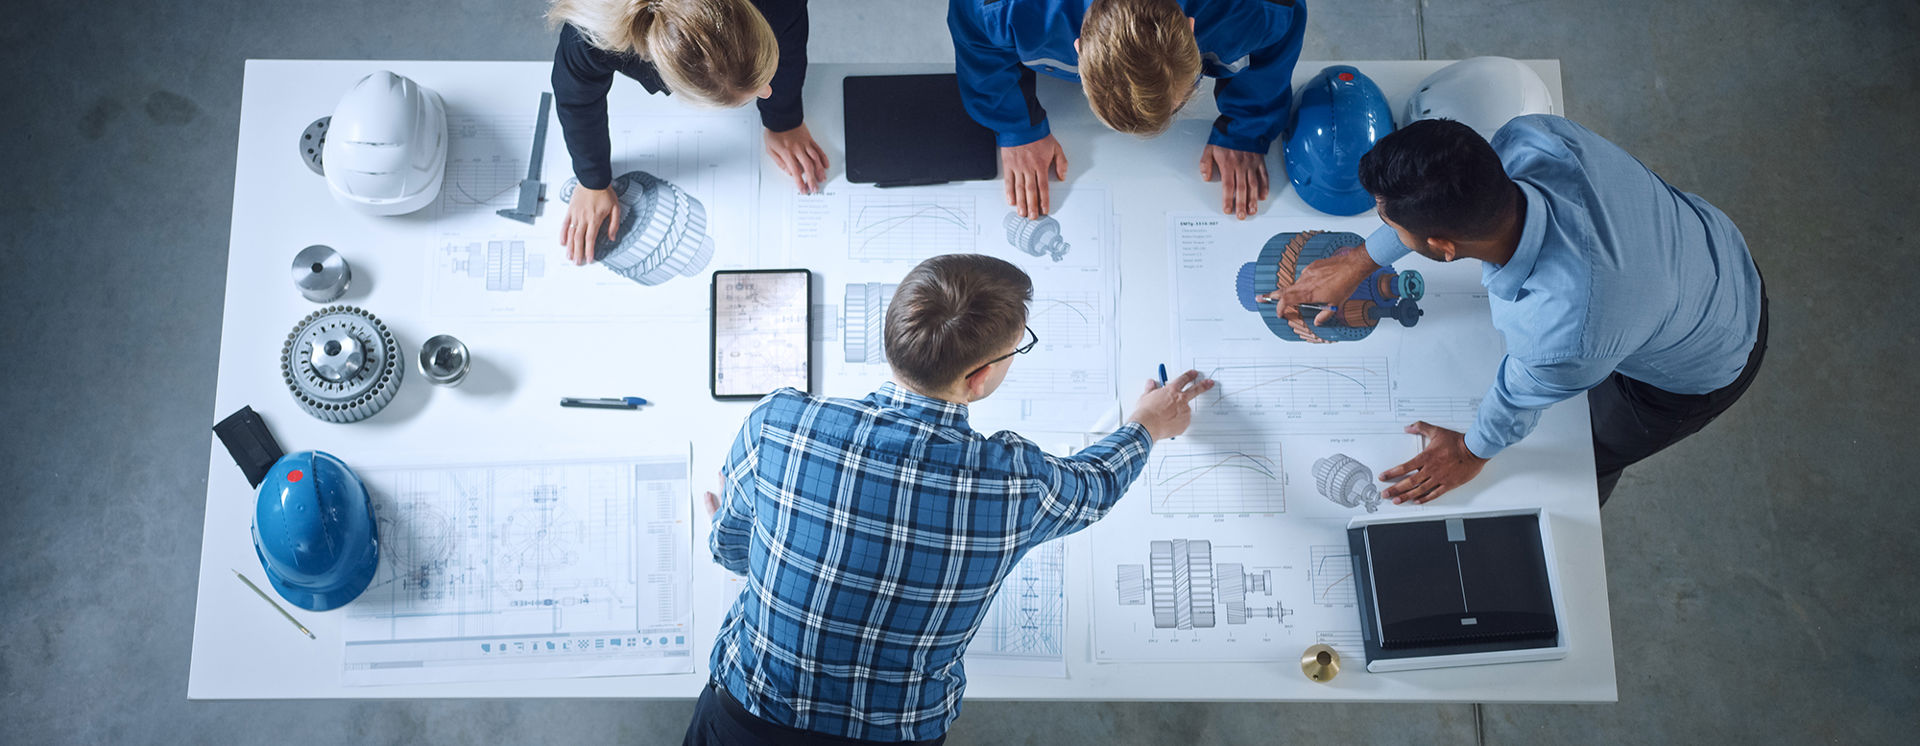 Stock Photo Team Of Industrial Engineers Lean On Office Table Analyze Machinery Blueprints Architectural 1902078616